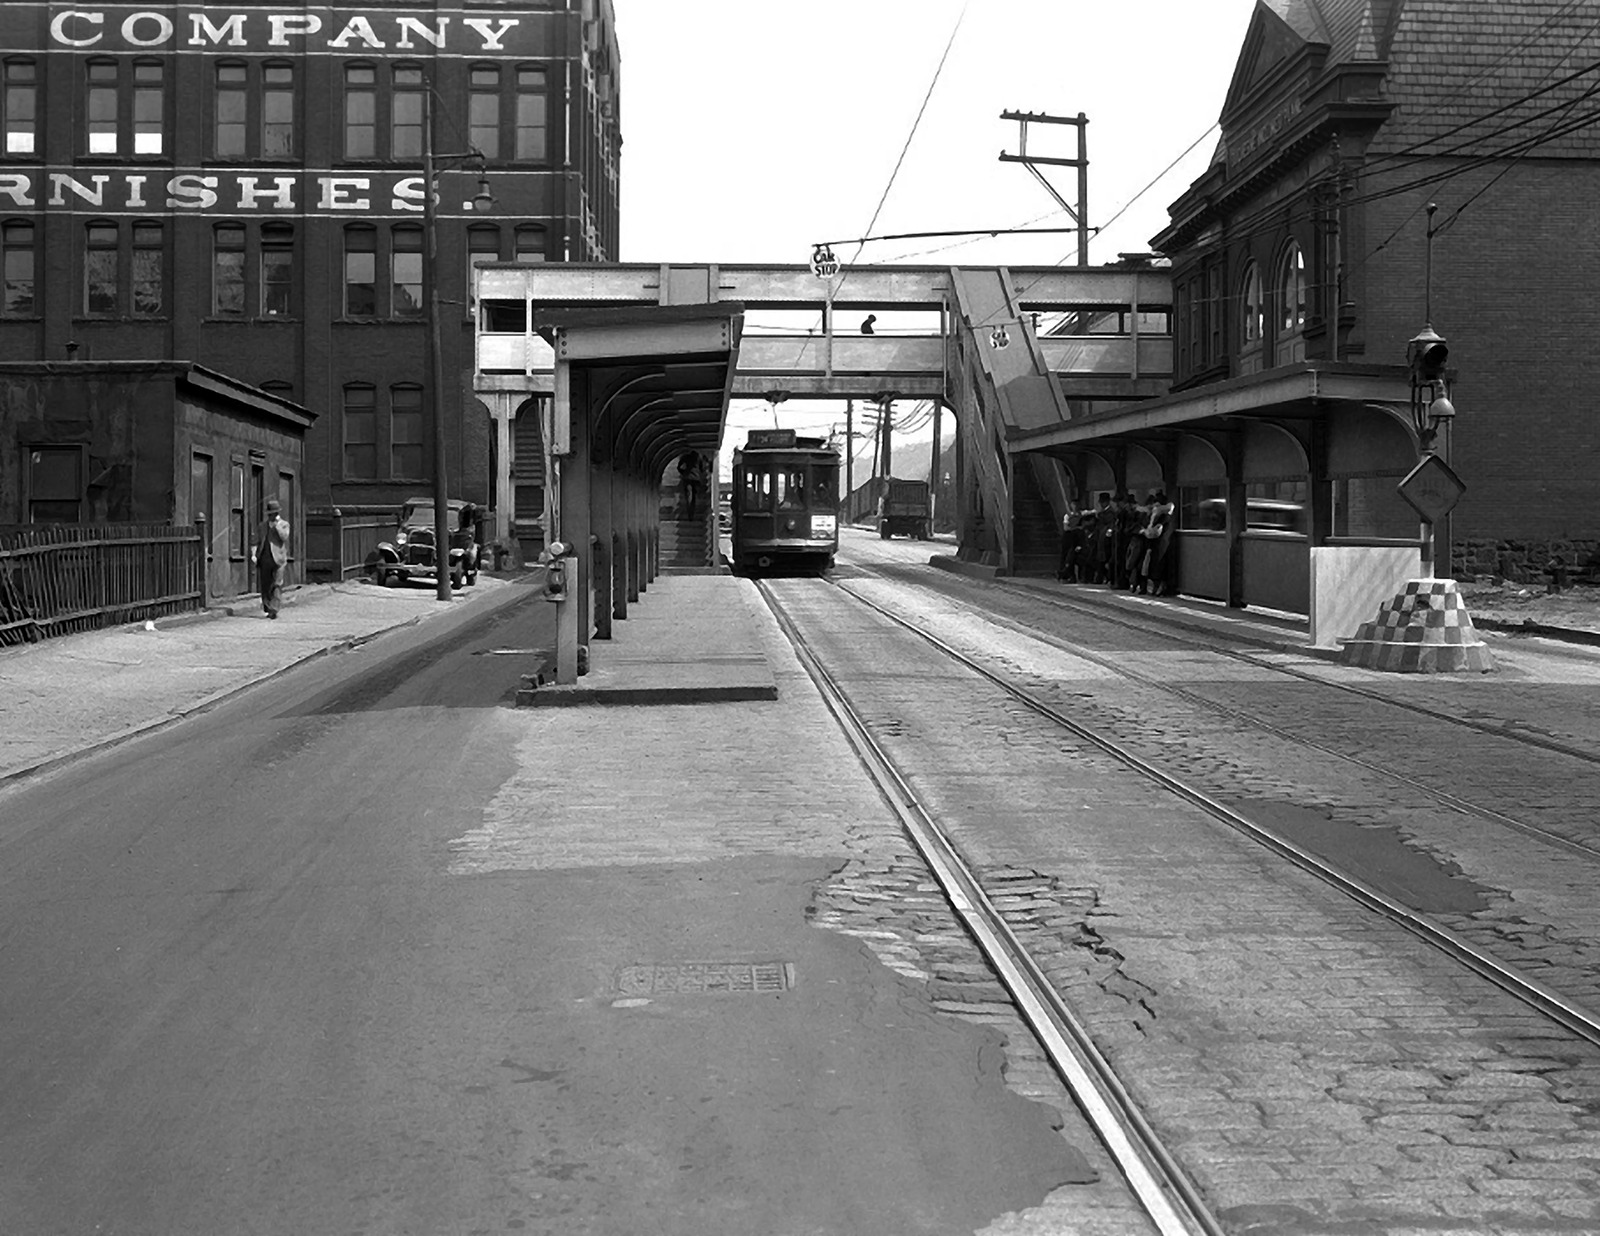 1932 Streetcar Stop at Duquesne Incline, PA Old Photo 8.5